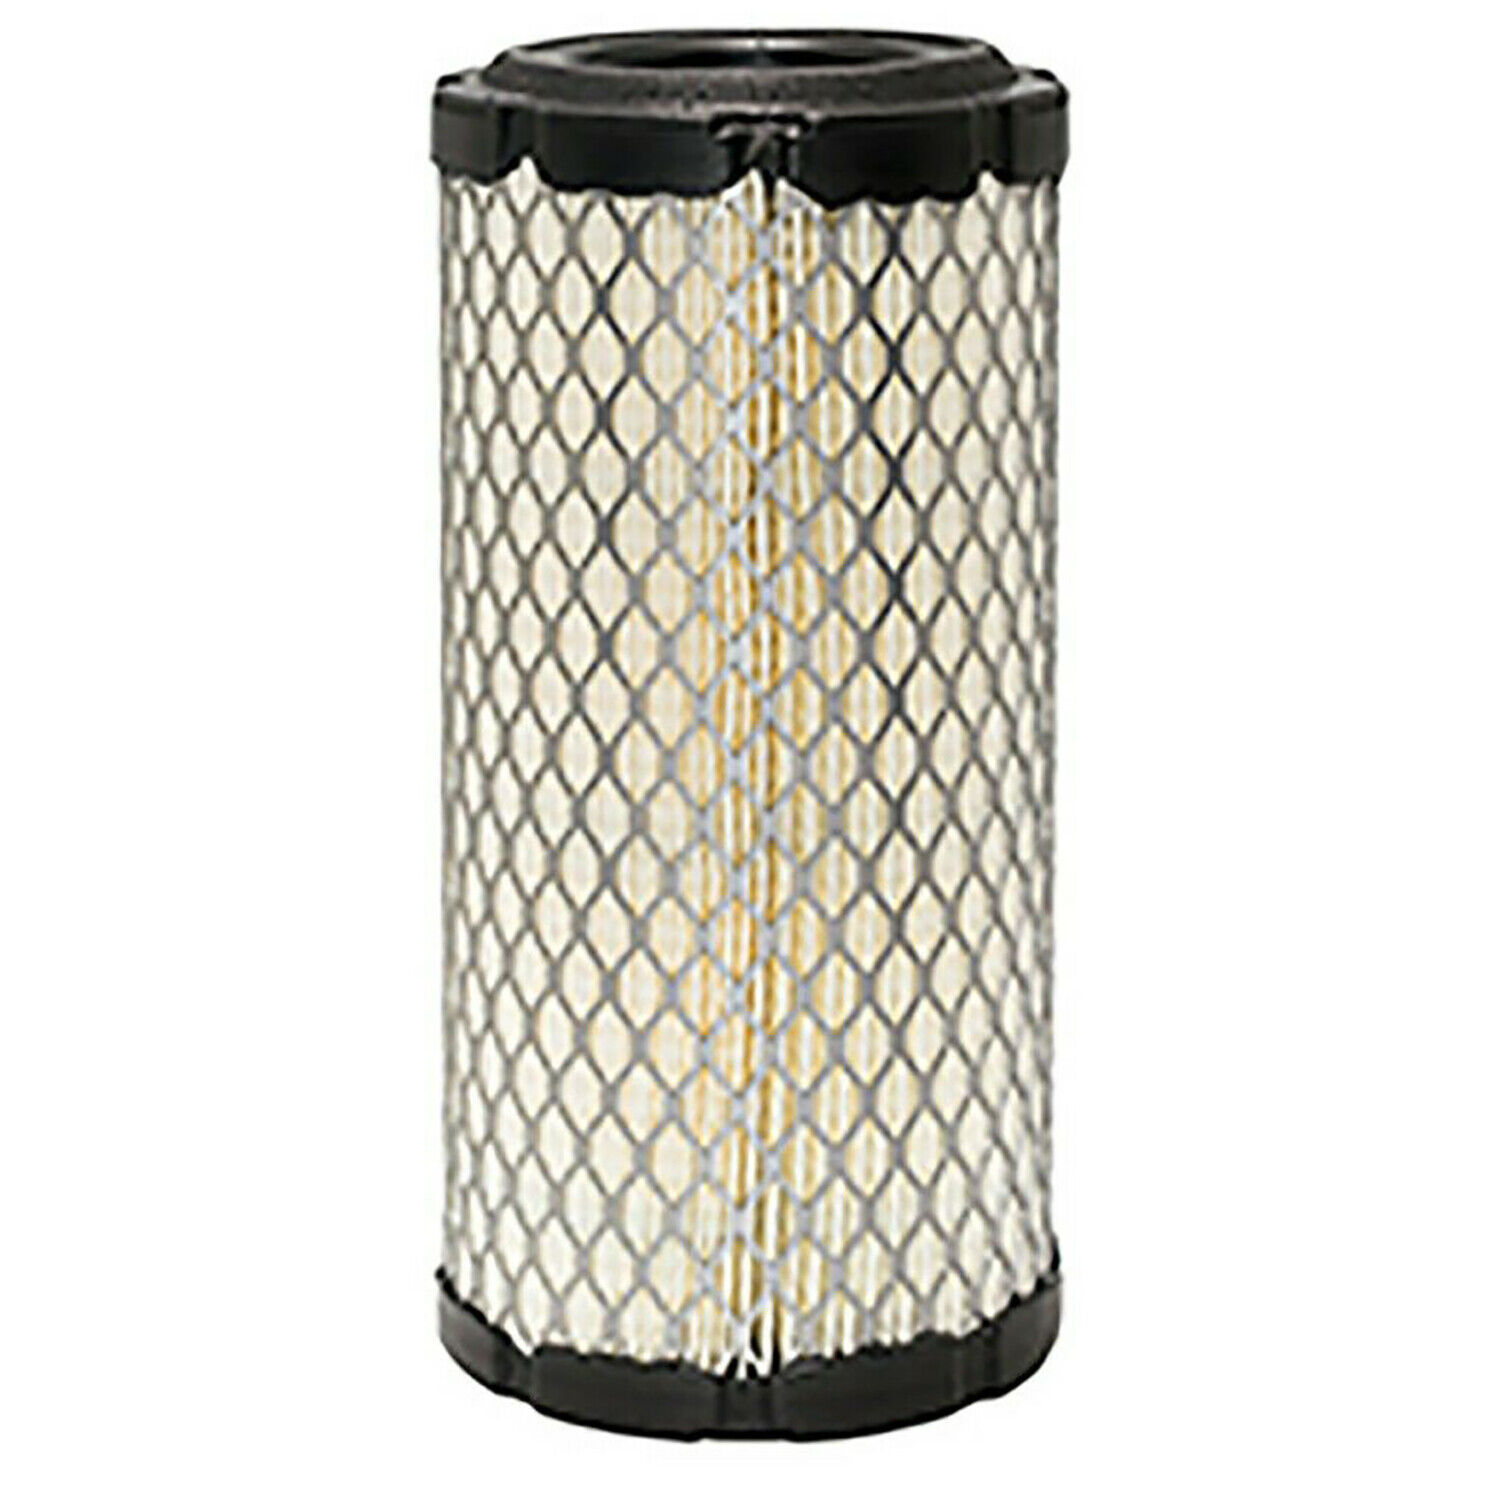 Air Filter 11-9059 For Thermo King MD-100, MD-200, MD-200MT, MD-300,Spectrum TS